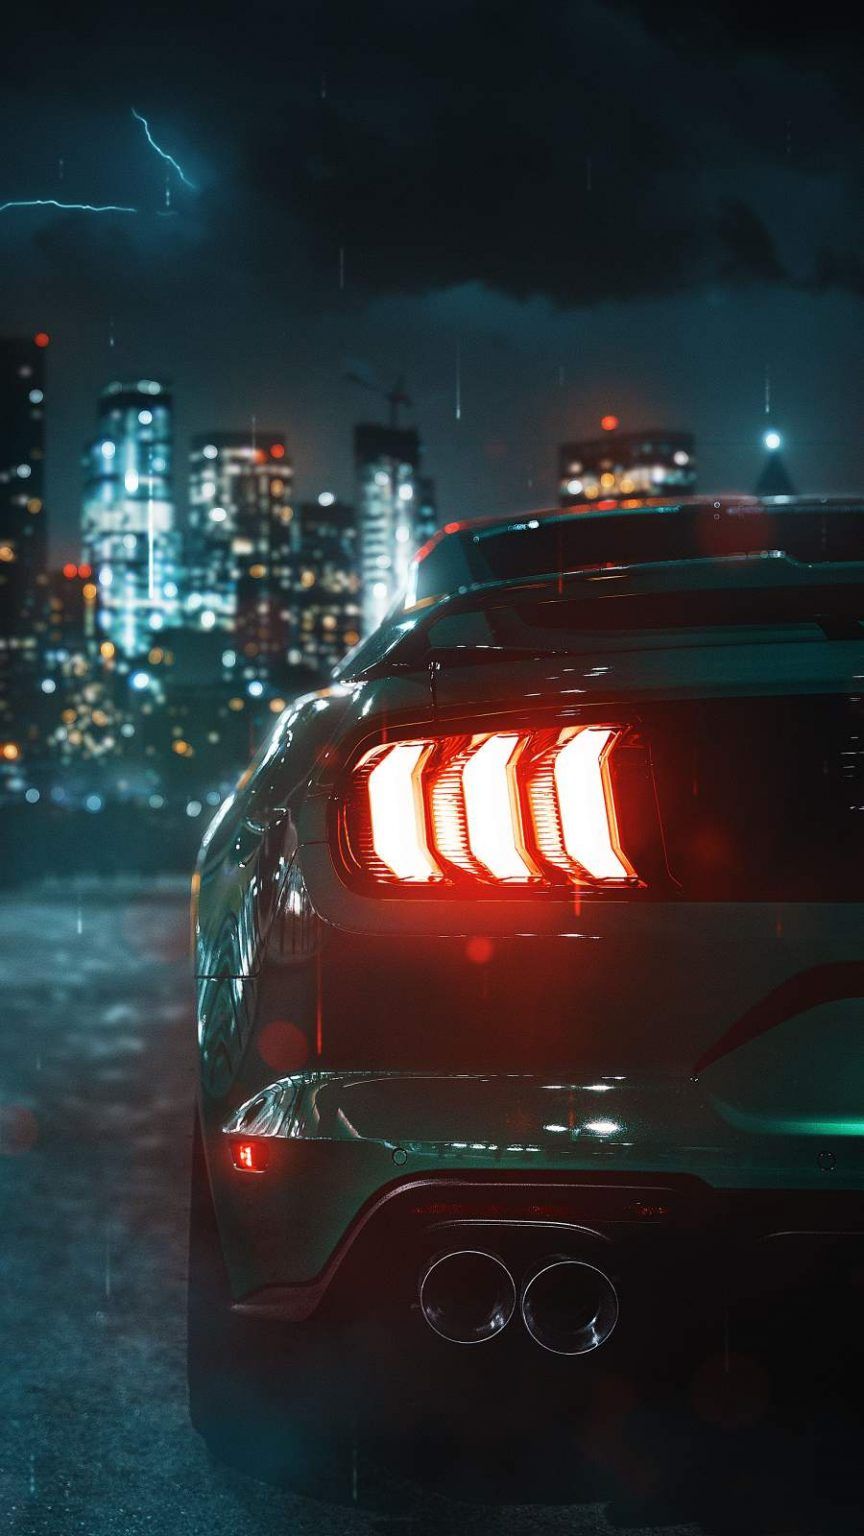 Download Outrun the competition with the Mustang Iphone Wallpaper   Wallpaperscom